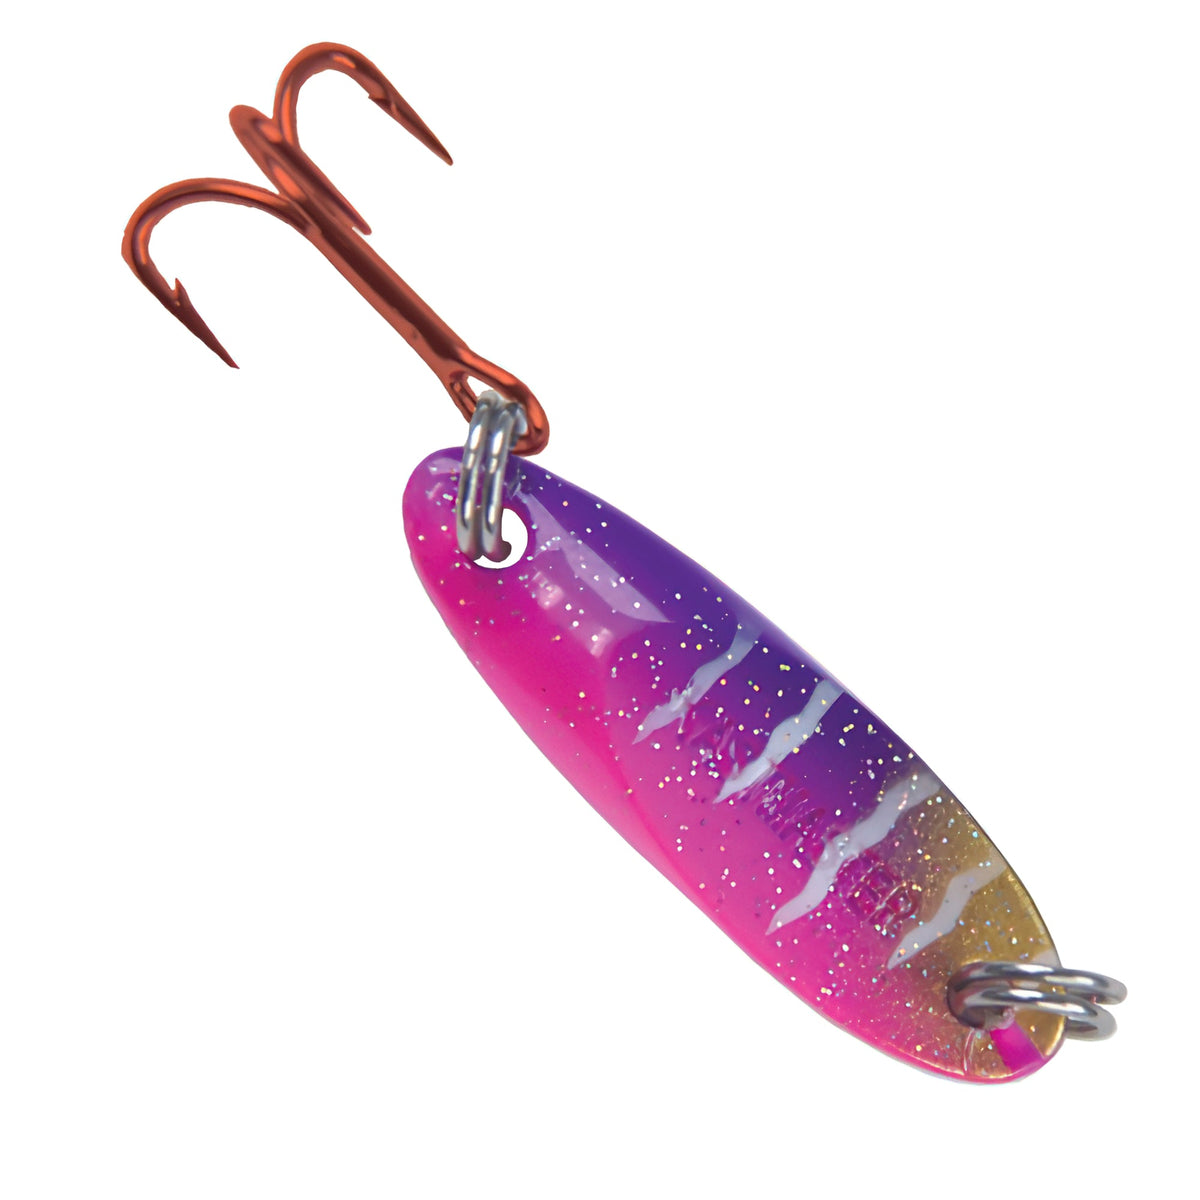 Vintage Millsite Rattle Bug Lure - A Collector's Favorite